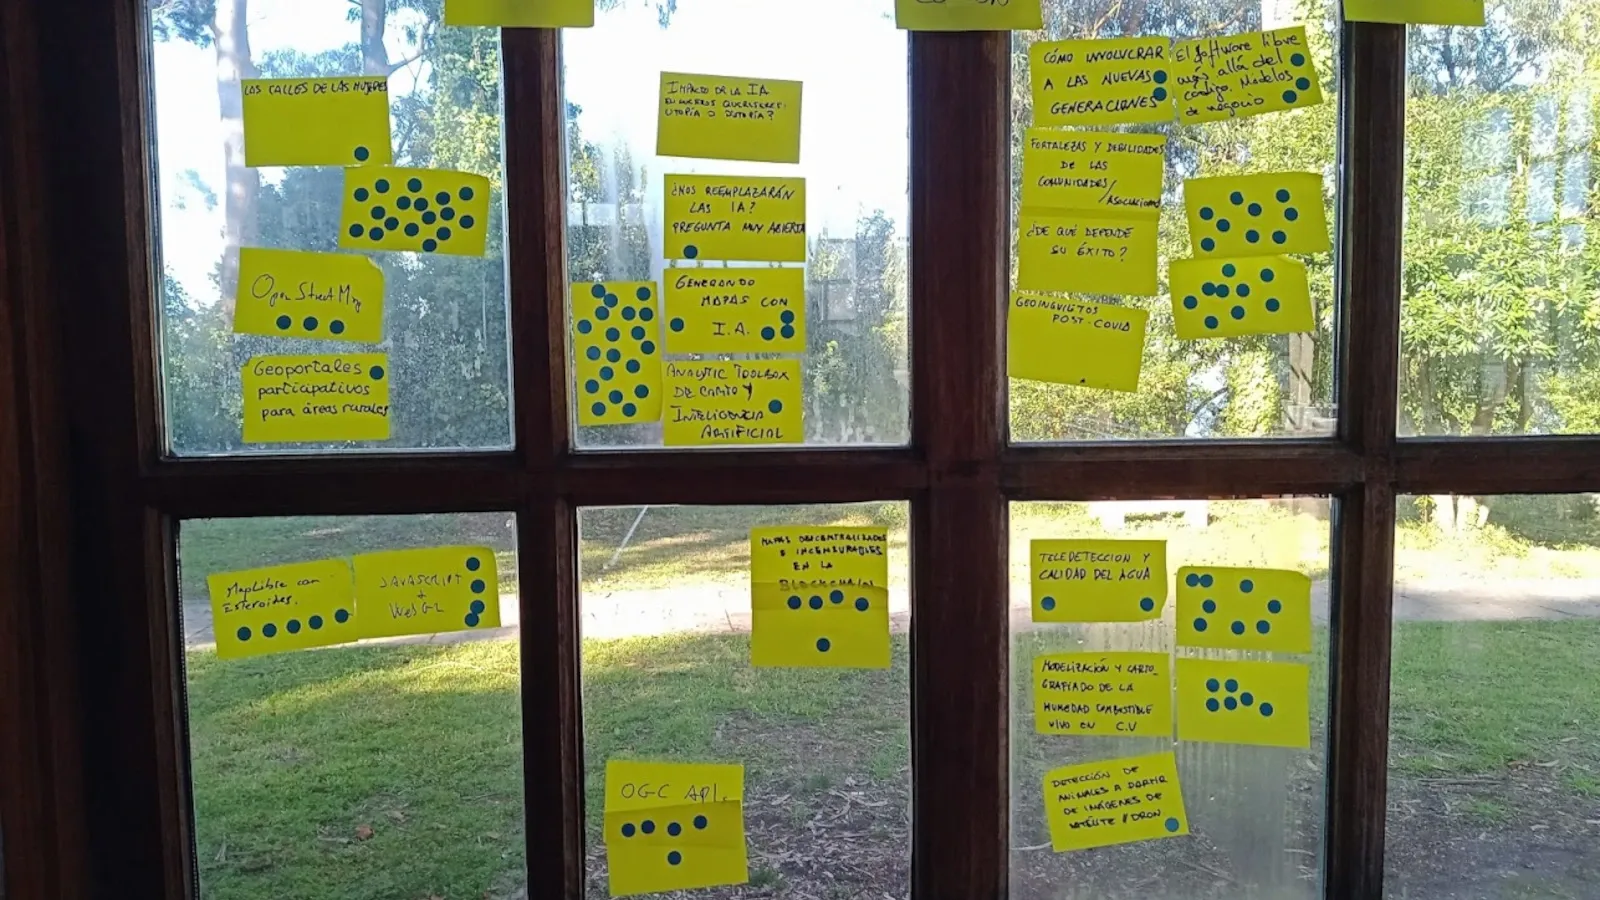 Grid of the most voted topics of the conference on post-it